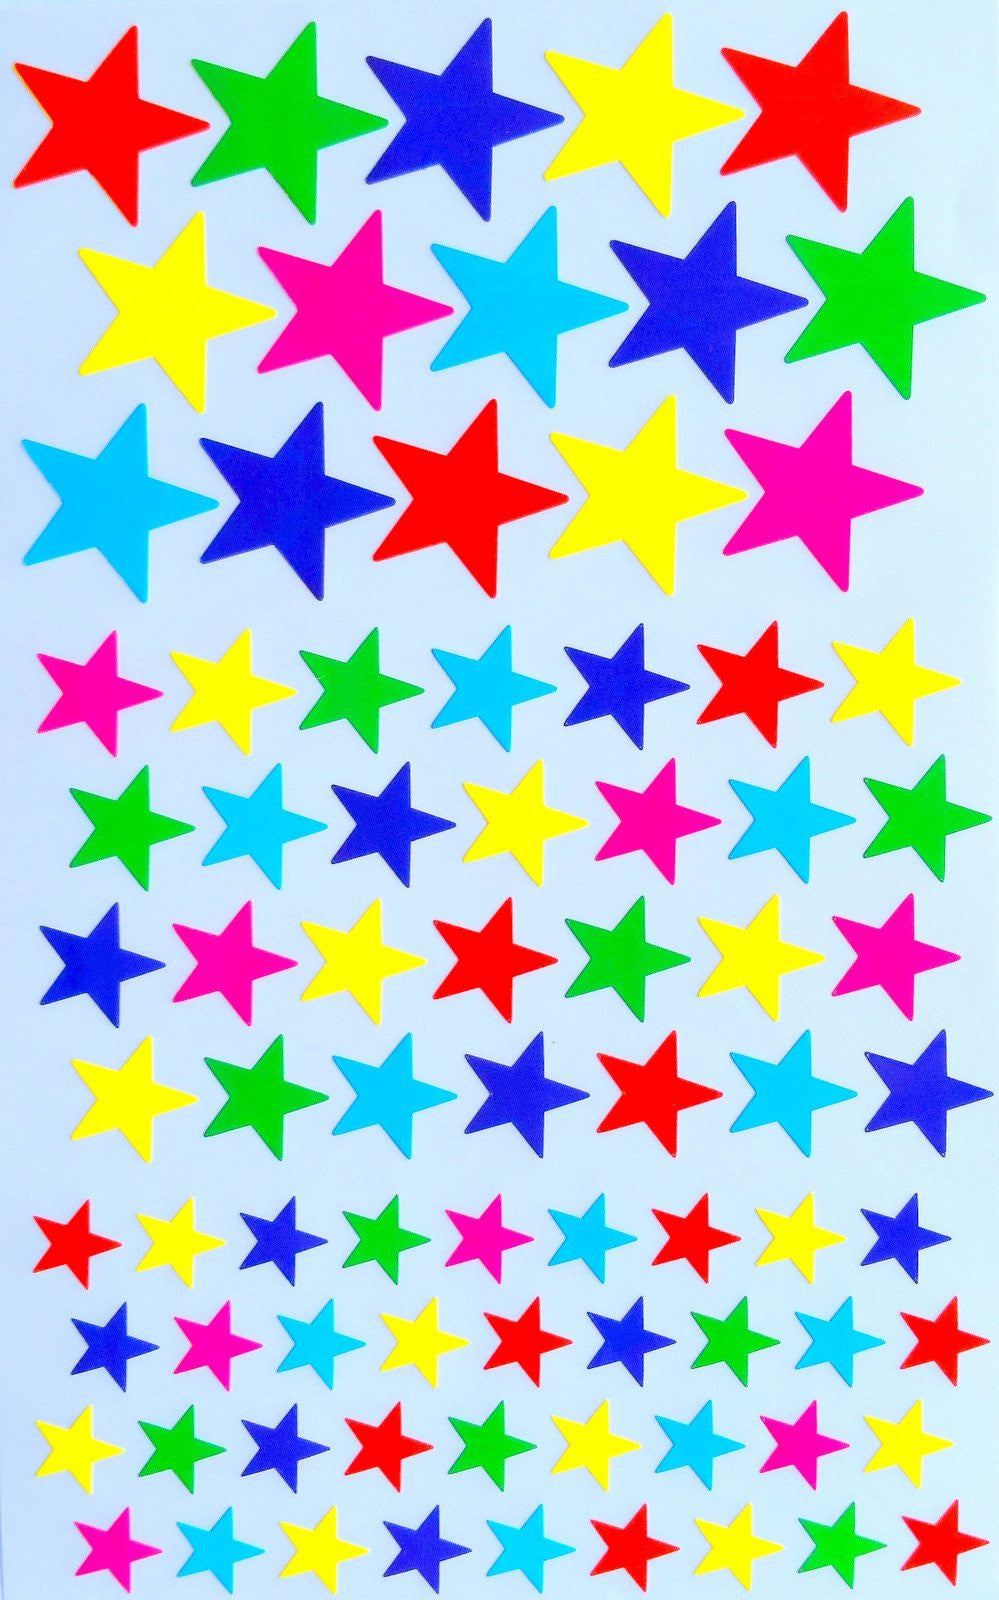 Multi Color Star Stickers in 3 Sizes, 6 Assorted Colors Star Sticker by Royal Green - 790 Stickers